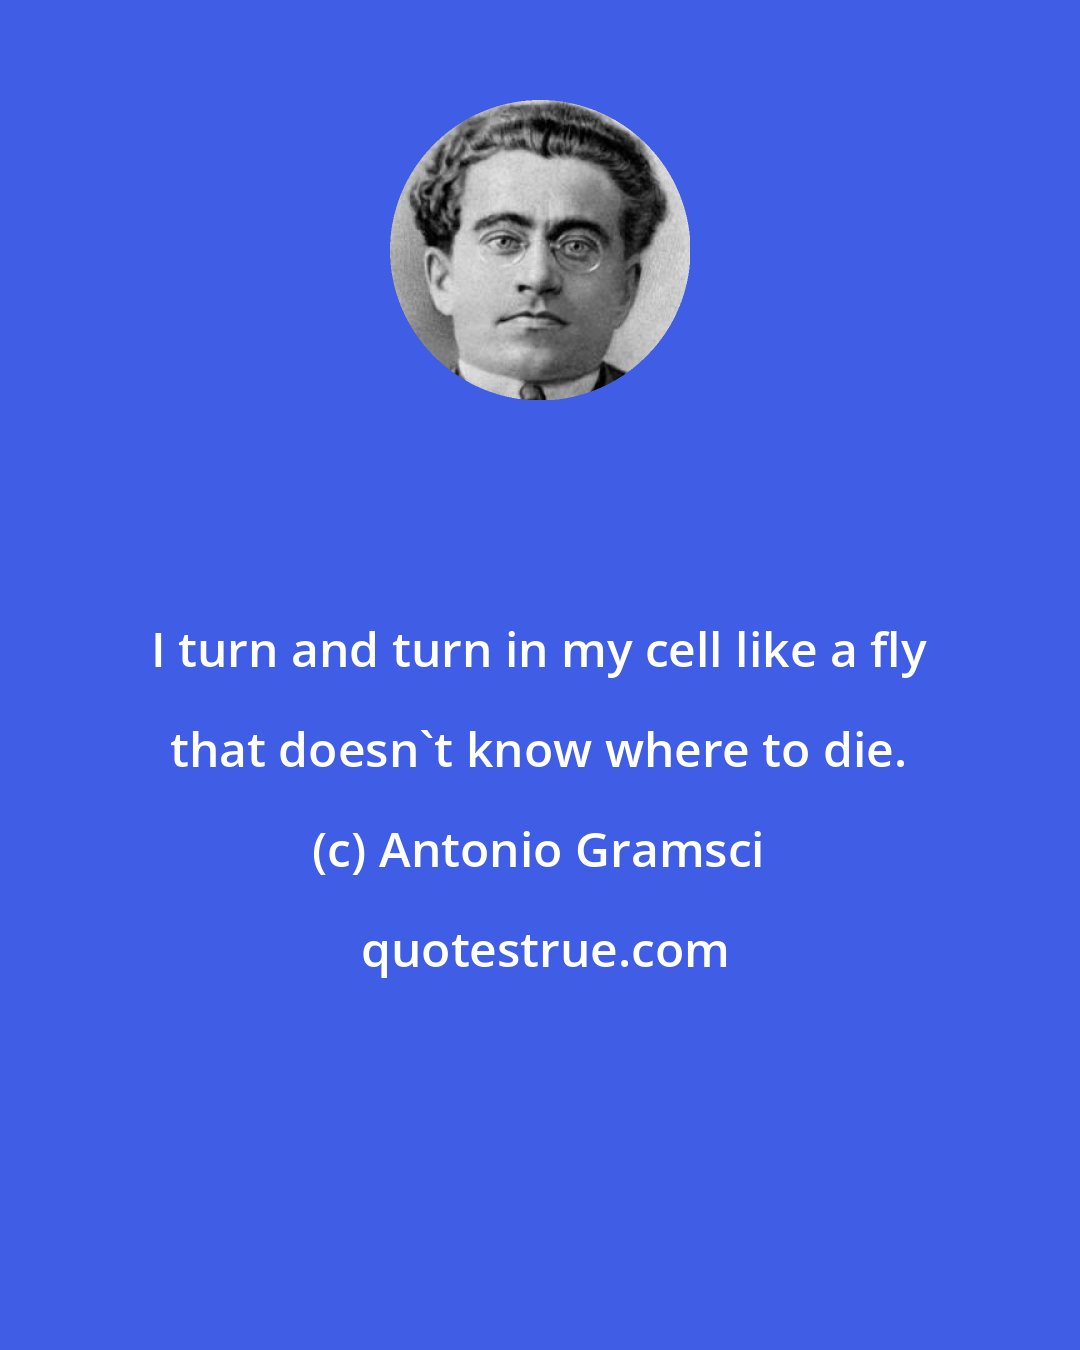 Antonio Gramsci: I turn and turn in my cell like a fly that doesn't know where to die.